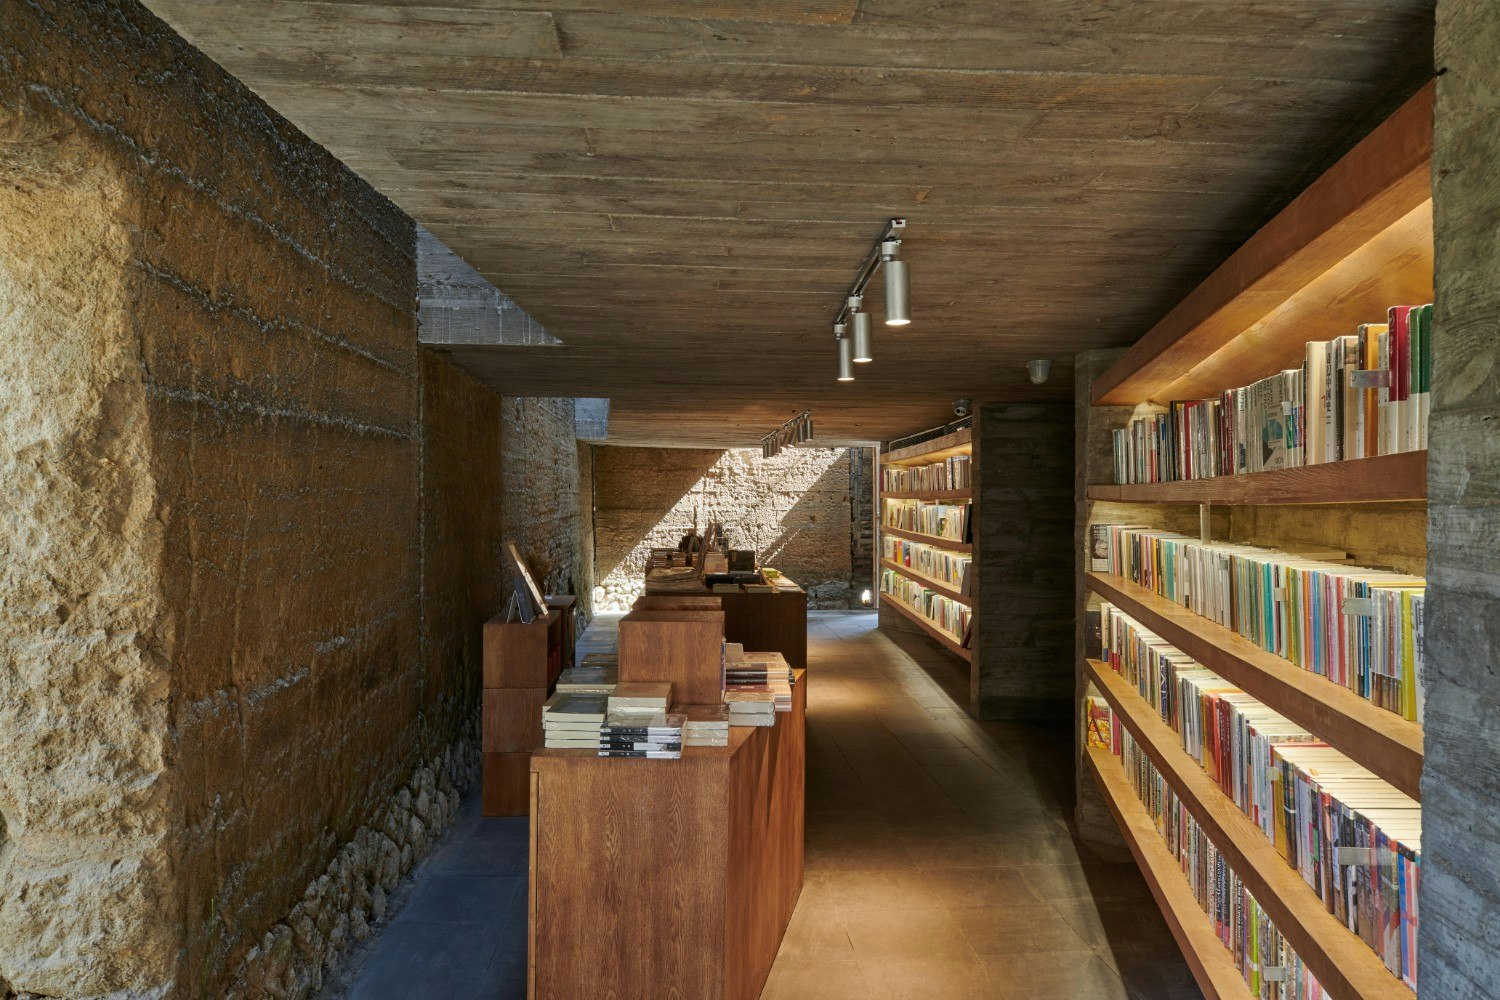 A reading area at the Paddy Field Bookstore in China